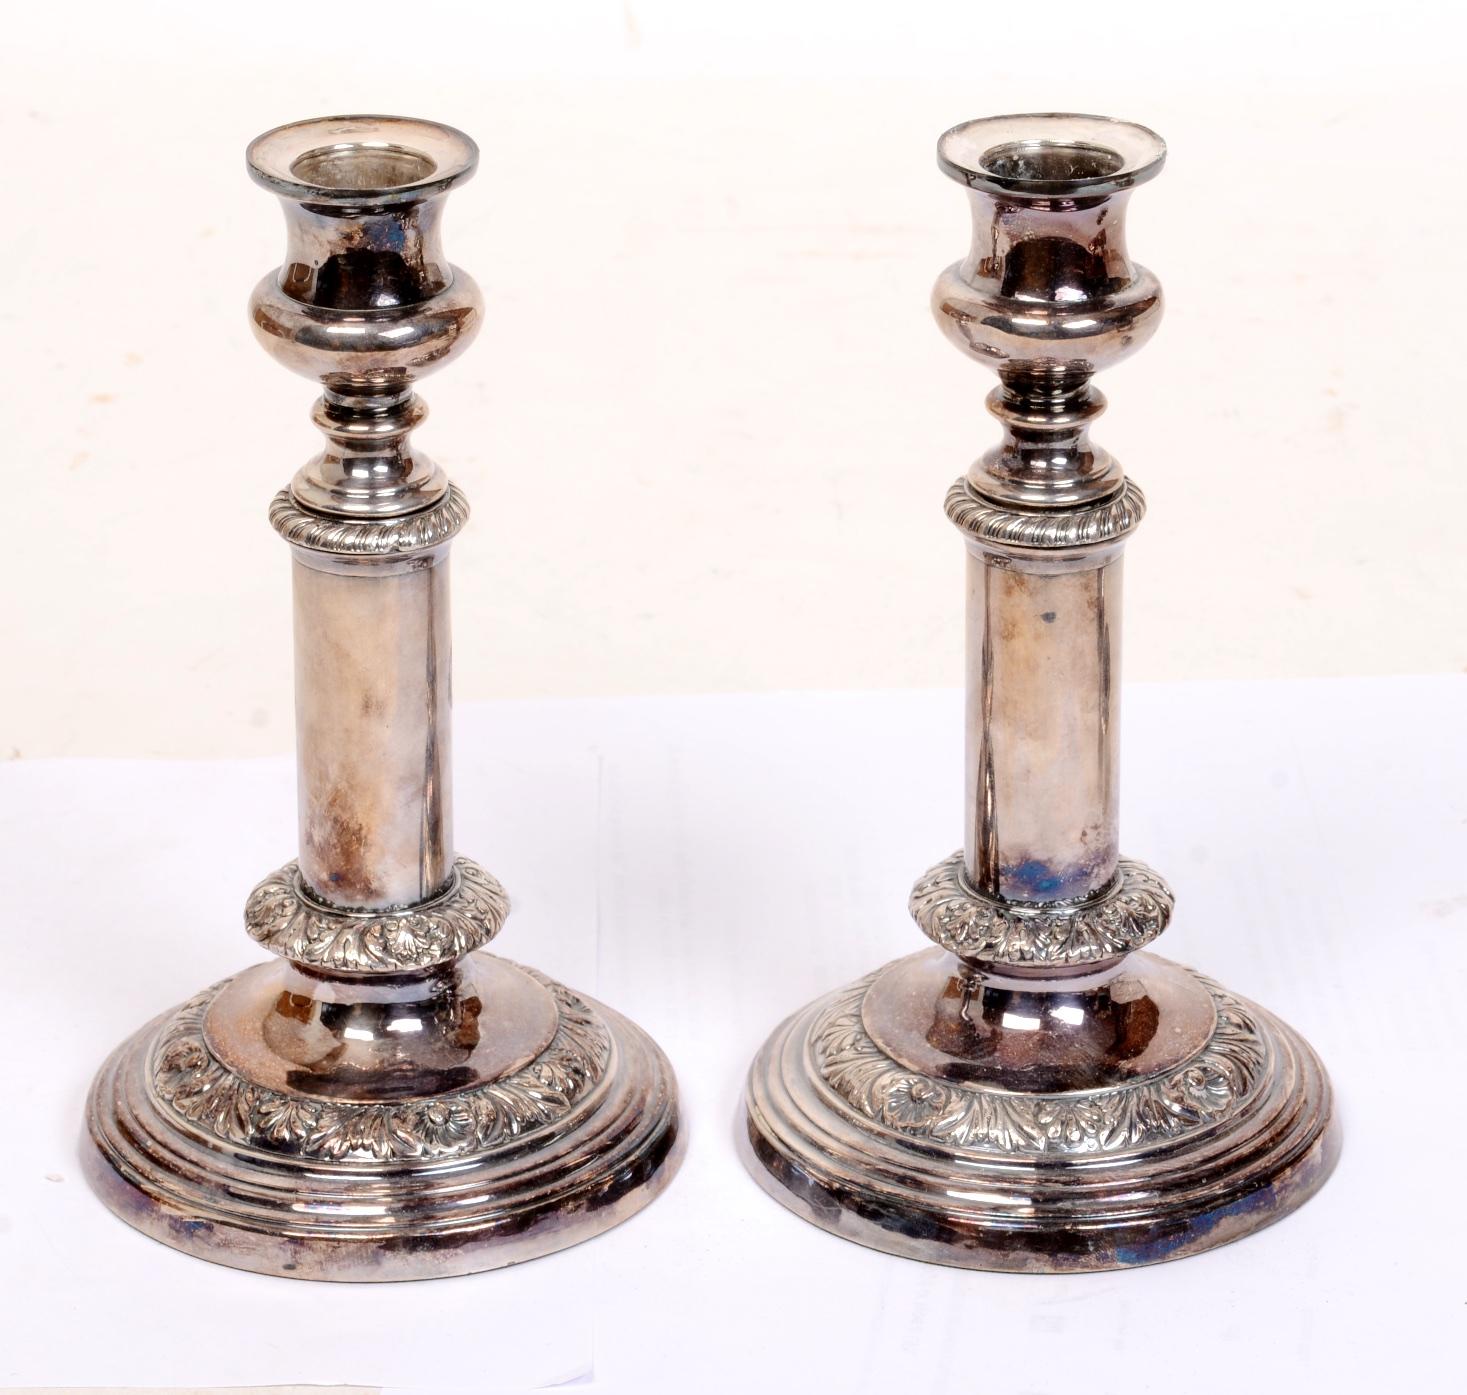 A pair of Geo III antique Sheffield plate telescopic candlesticks by the important maker Thomas & James Creswick who comes from the famous family of long time silversmiths. His Grandfather was one of the first silversmiths to register his mark at